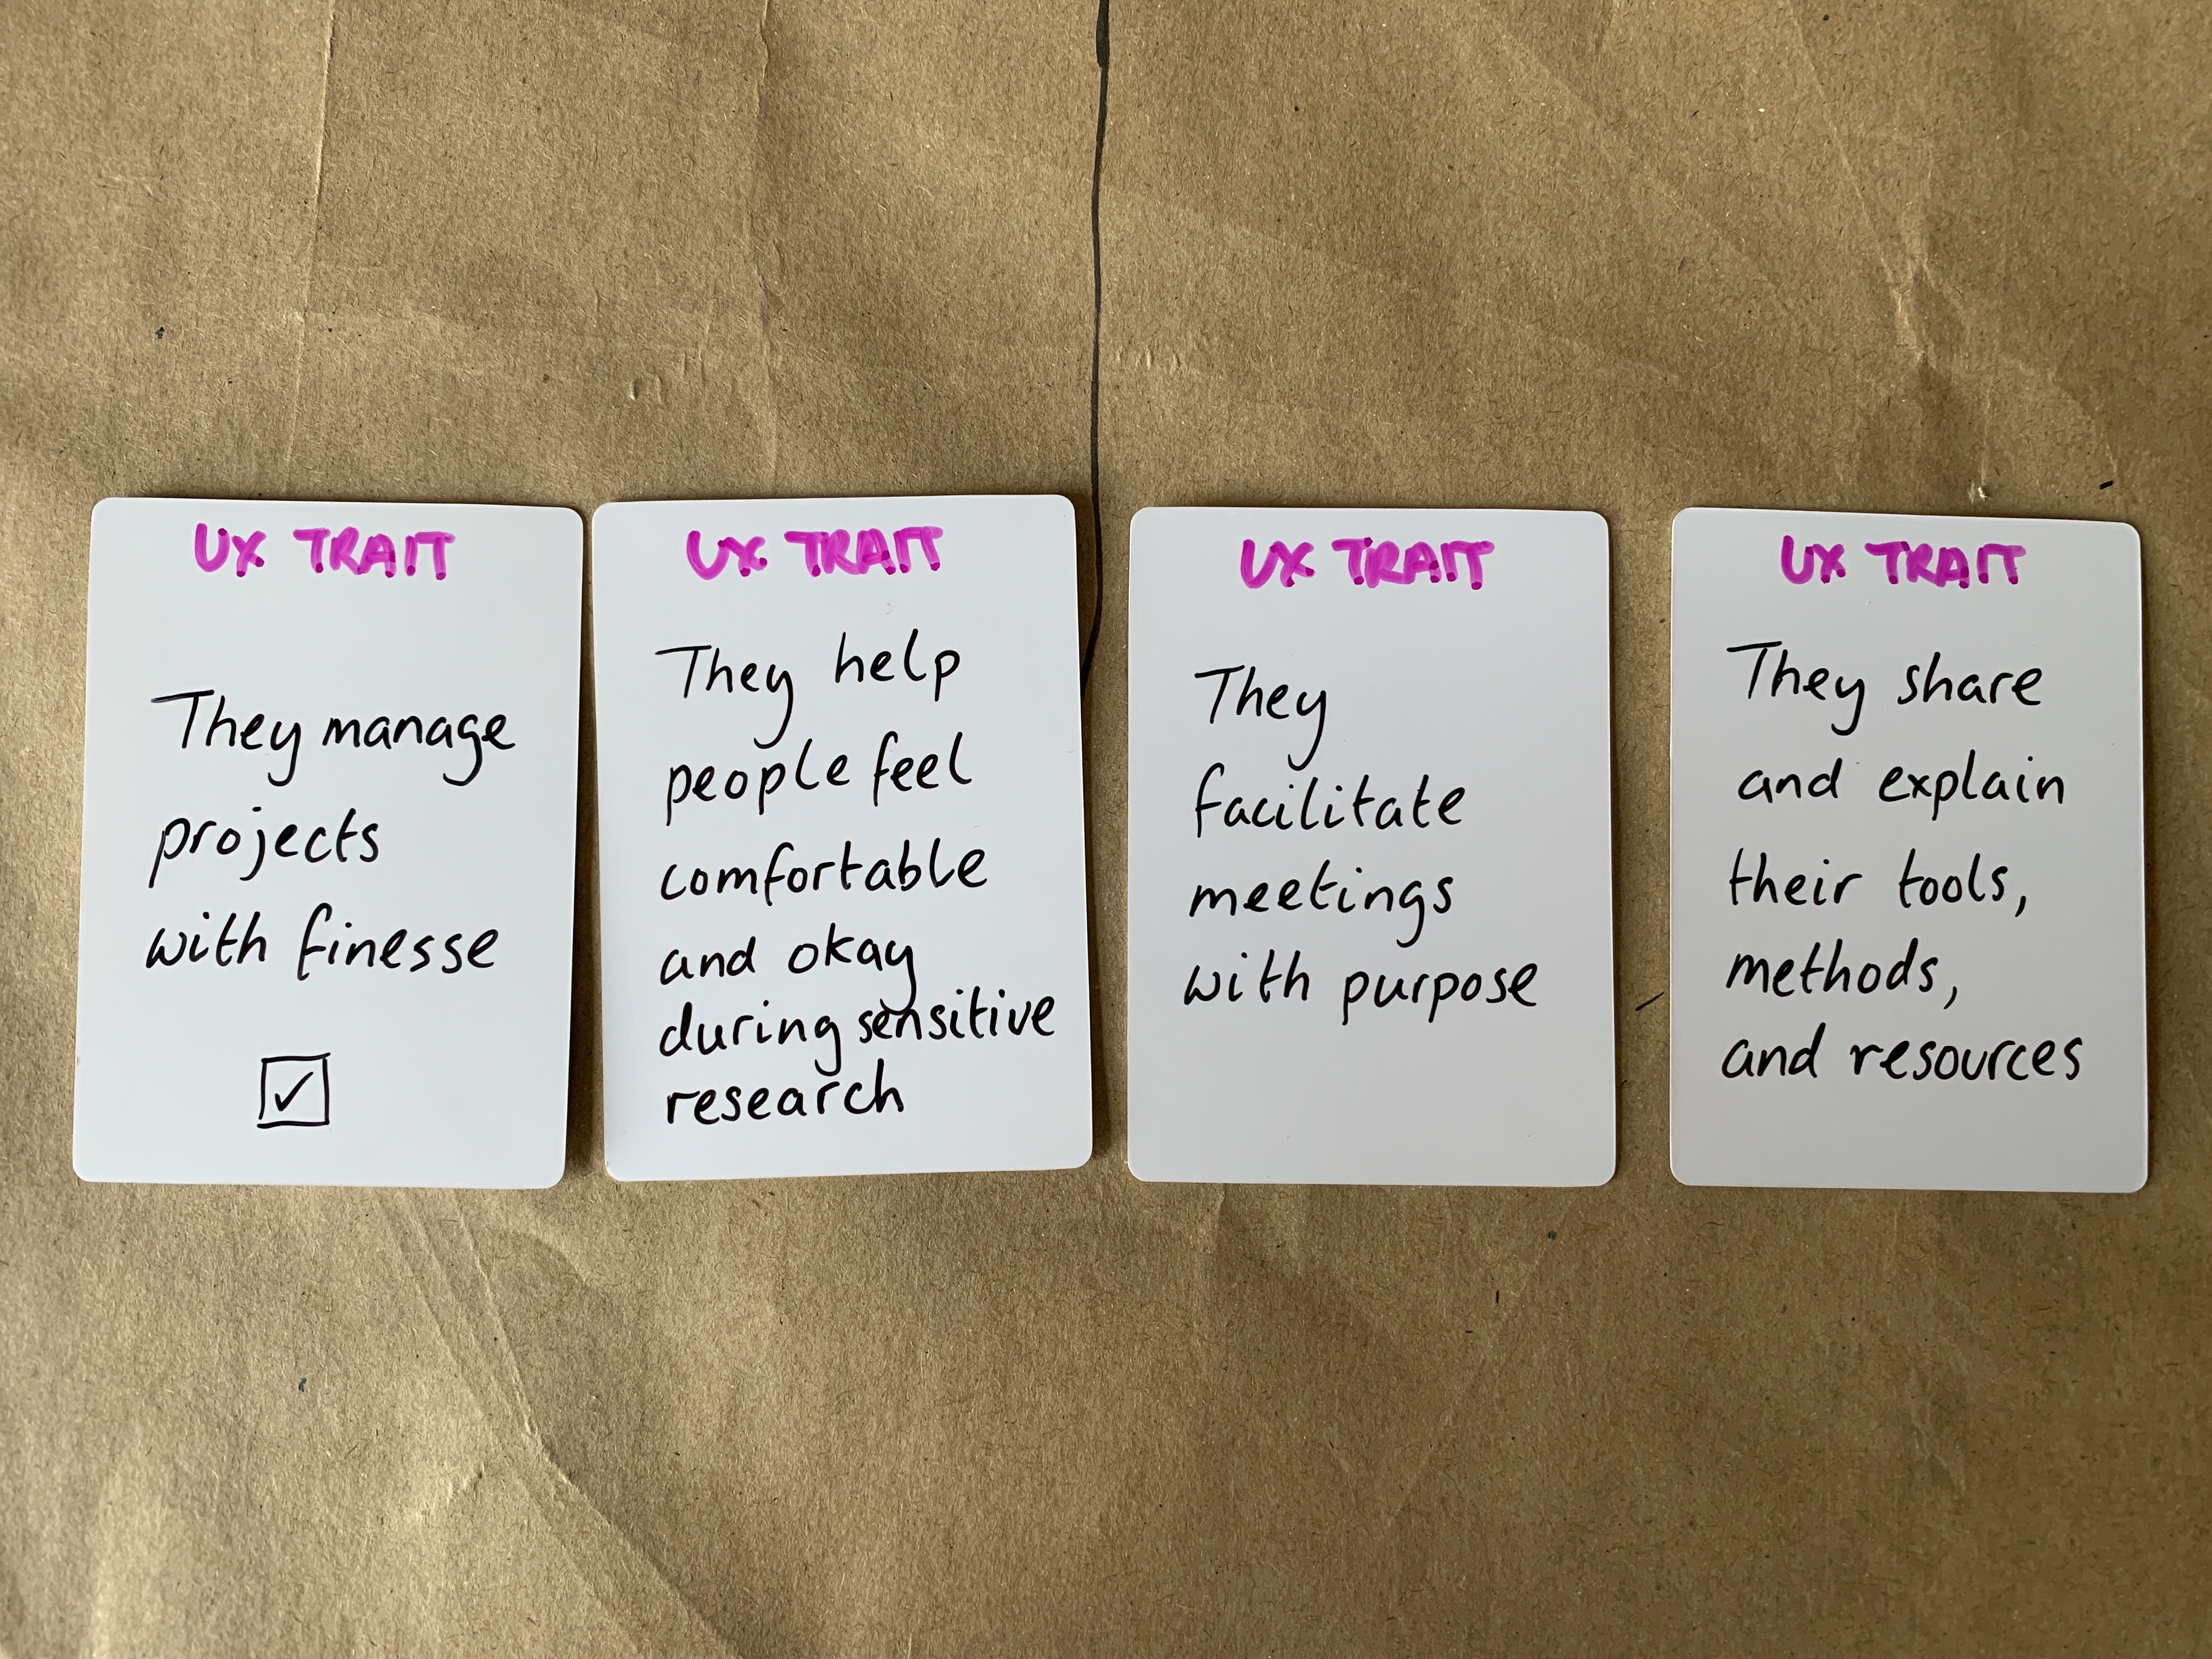 UX Trait cards - cards: they manage projects with finesse; they help people feel comfortable and okay during sensitive research; they facilitate meetings with purpos; they share and explain their tools methods and resources